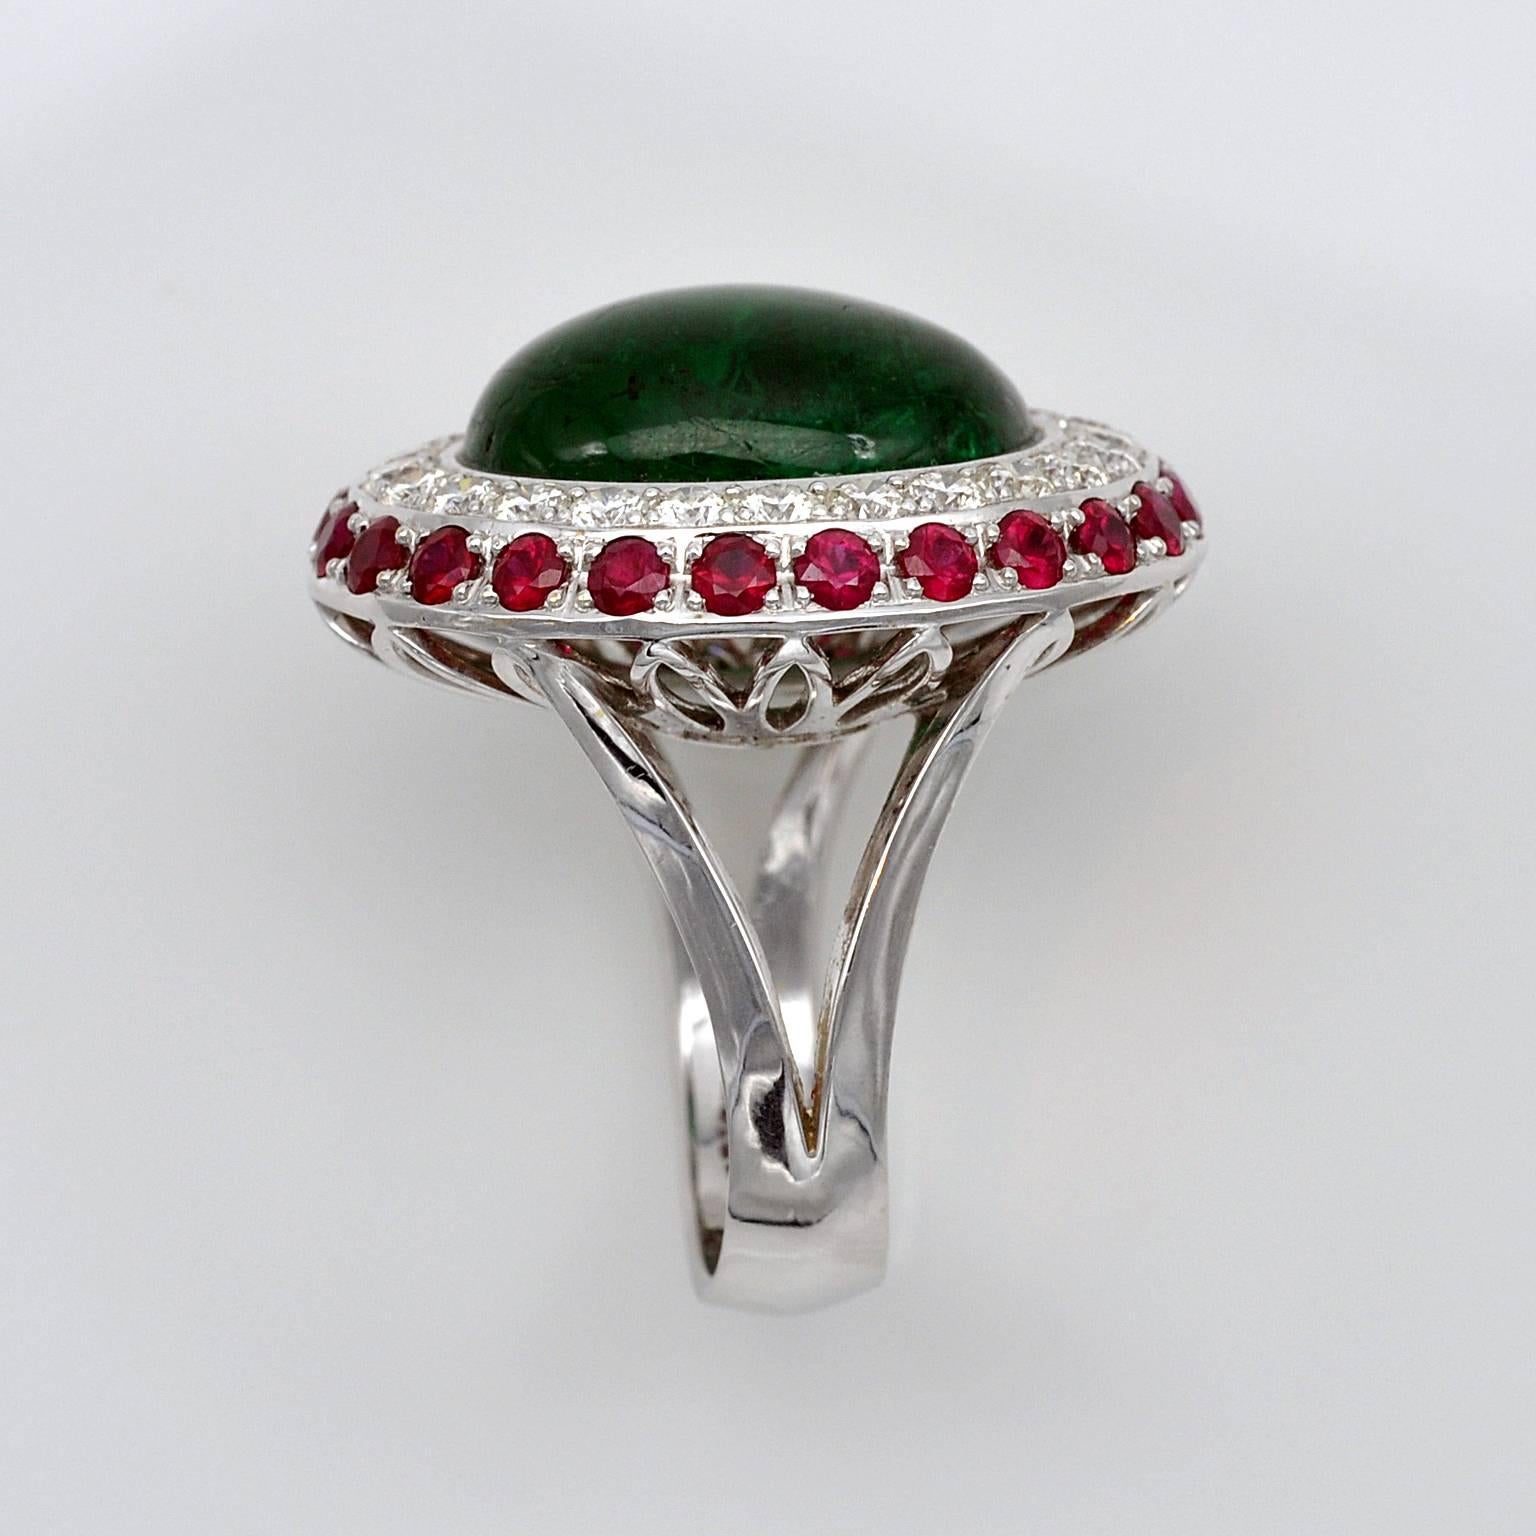 Impressive halo cocktail ring. A 16.09 carats Emerald cabochon is surrounded by a row of brilliant cut diamonds and rubies.
The emerald comes with a G.I.I. certificate.
